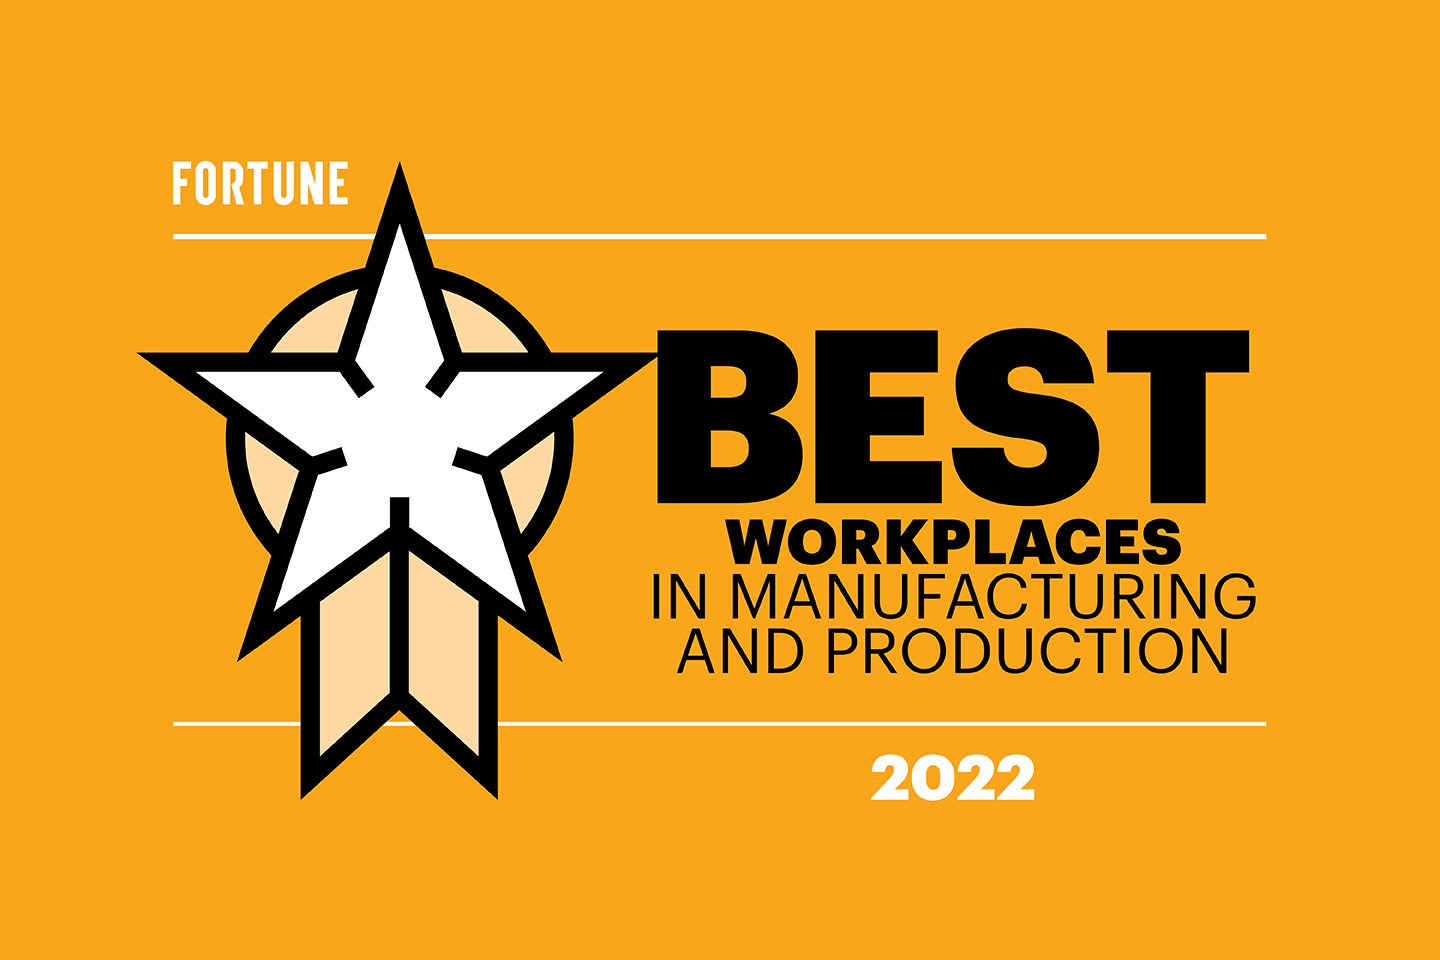 30 Best Small and Medium Workplaces in Manufacturing and Production